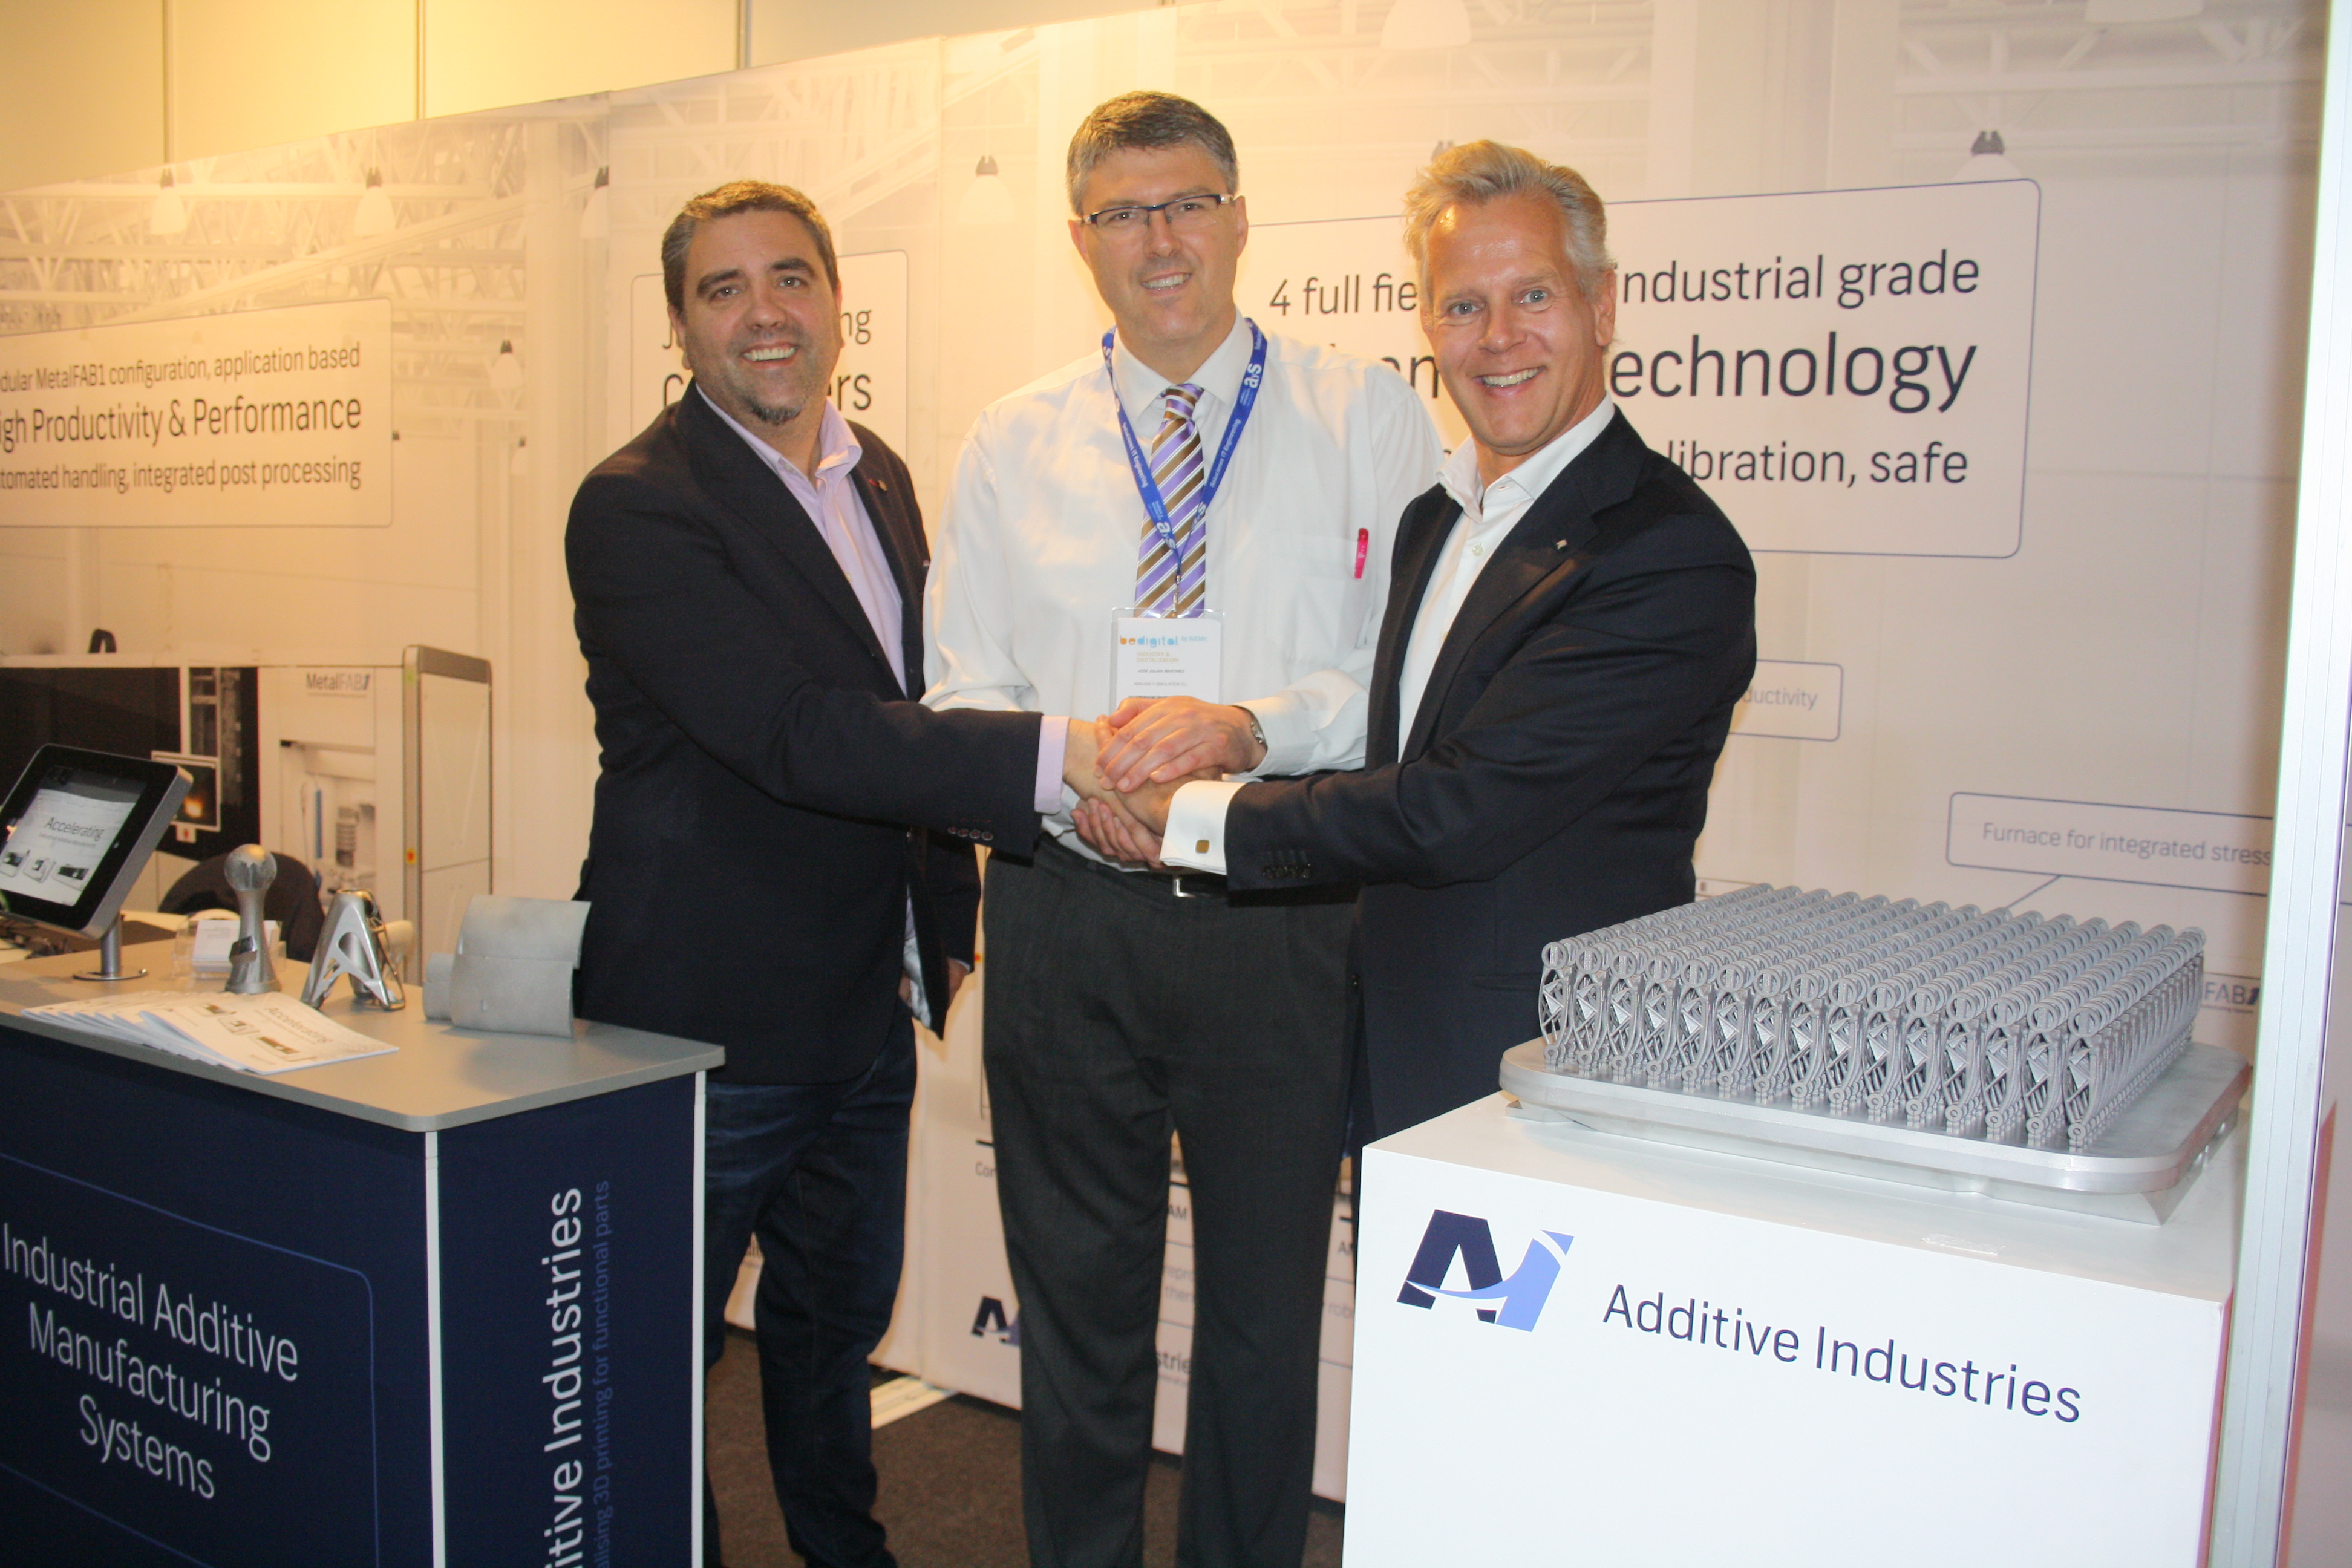 The partners plan to increase the use of metal additive manufacturing systems in a range of industries.